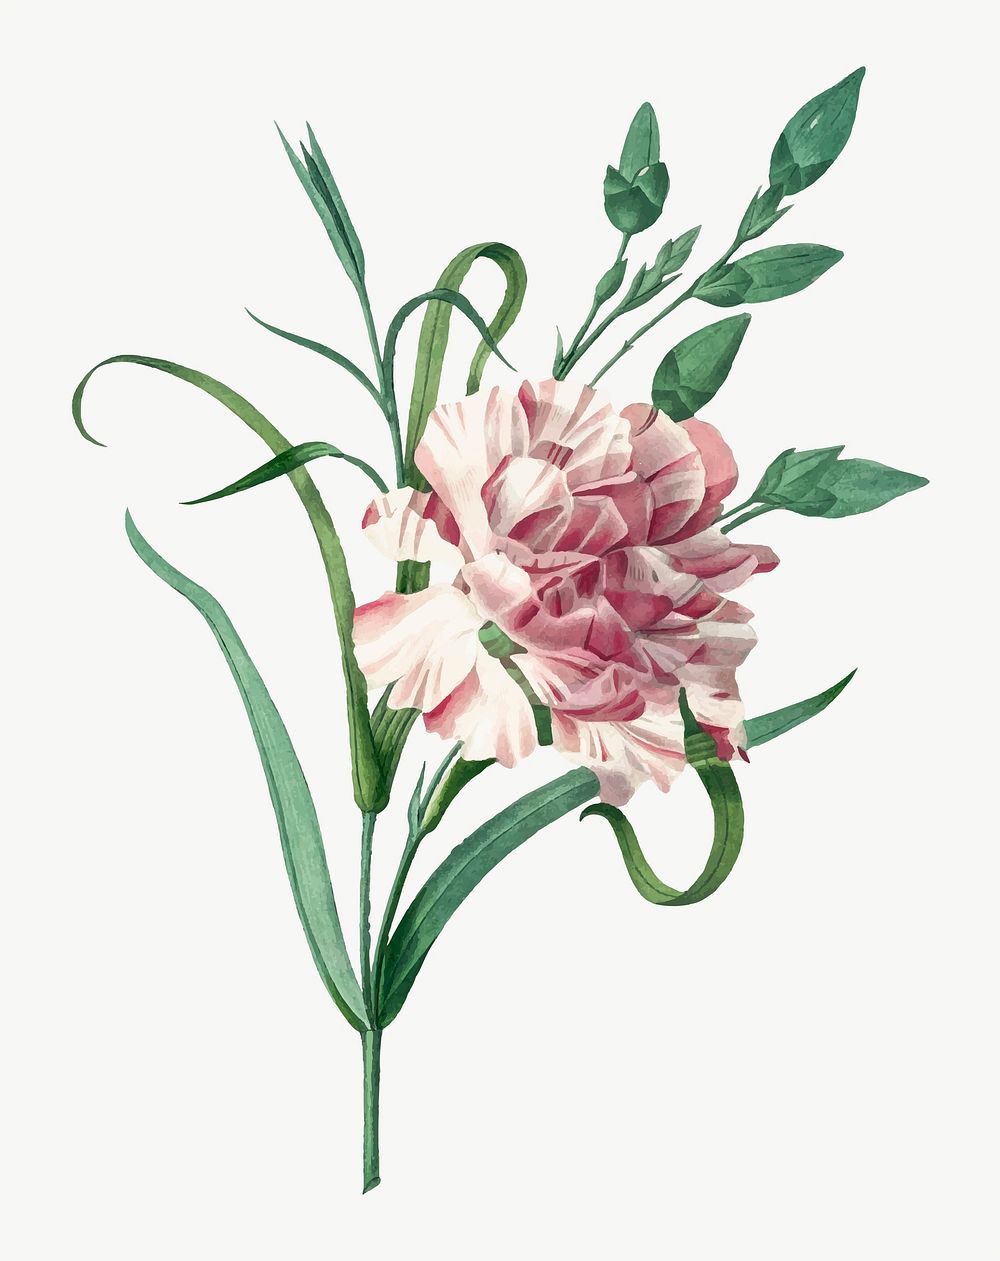 Botanical Carnation flower vector illustration, remixed from artworks by Pierre-Joseph Redout&eacute;